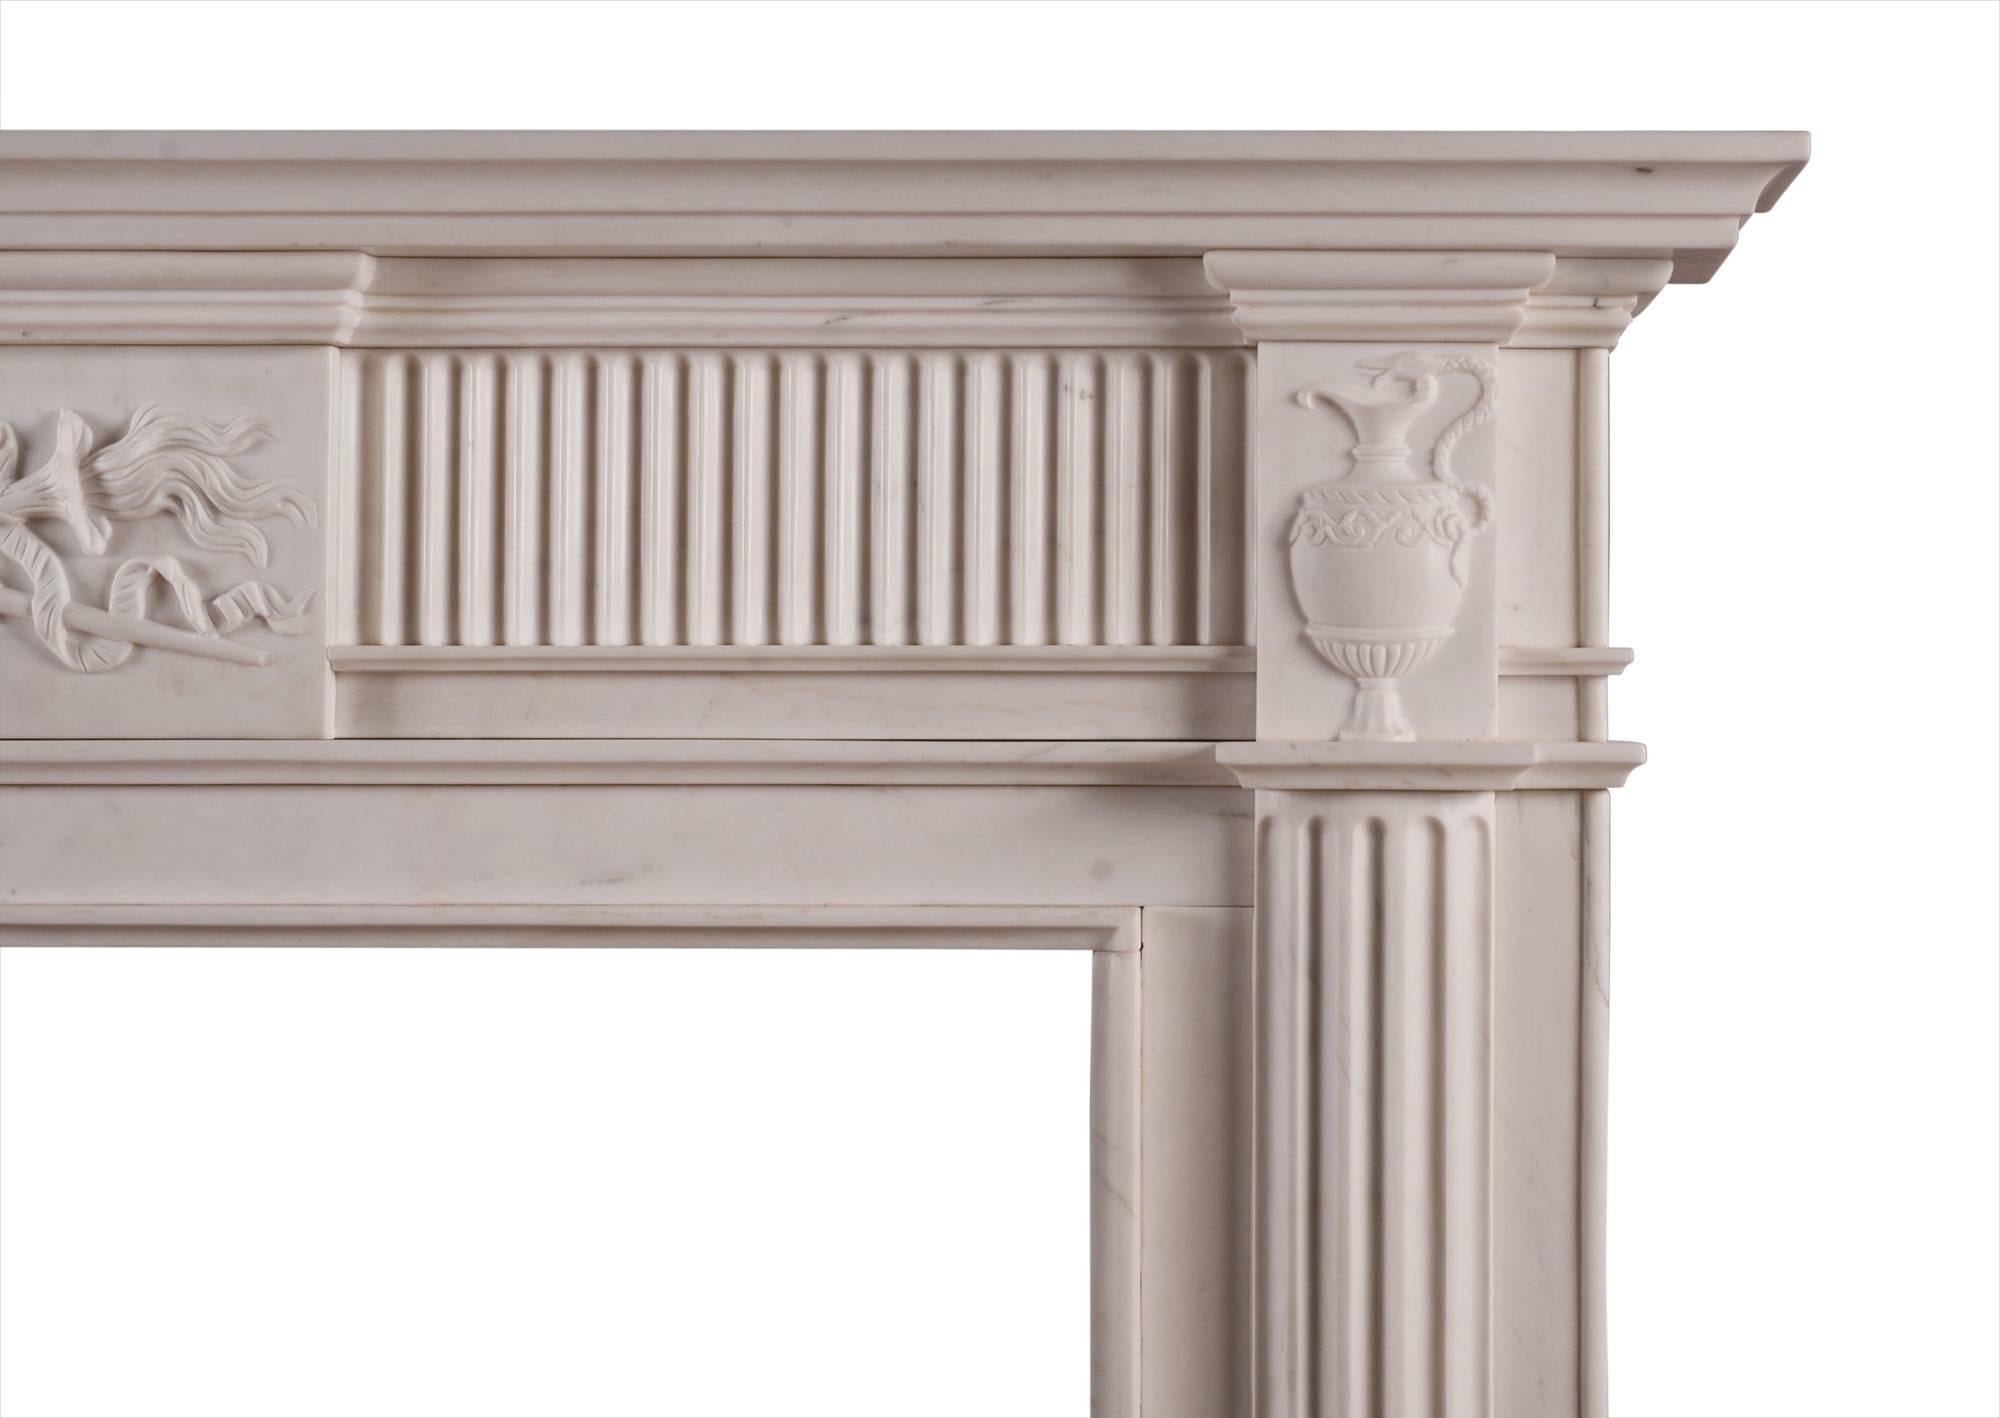 A well-proportioned English Georgian style fireplace. The fluted frieze with centre block of the carved centre of winged staff and flamed torch, intertwined with ribbons and serpent. The end blockings of classical Grecian urns, with egg and dart